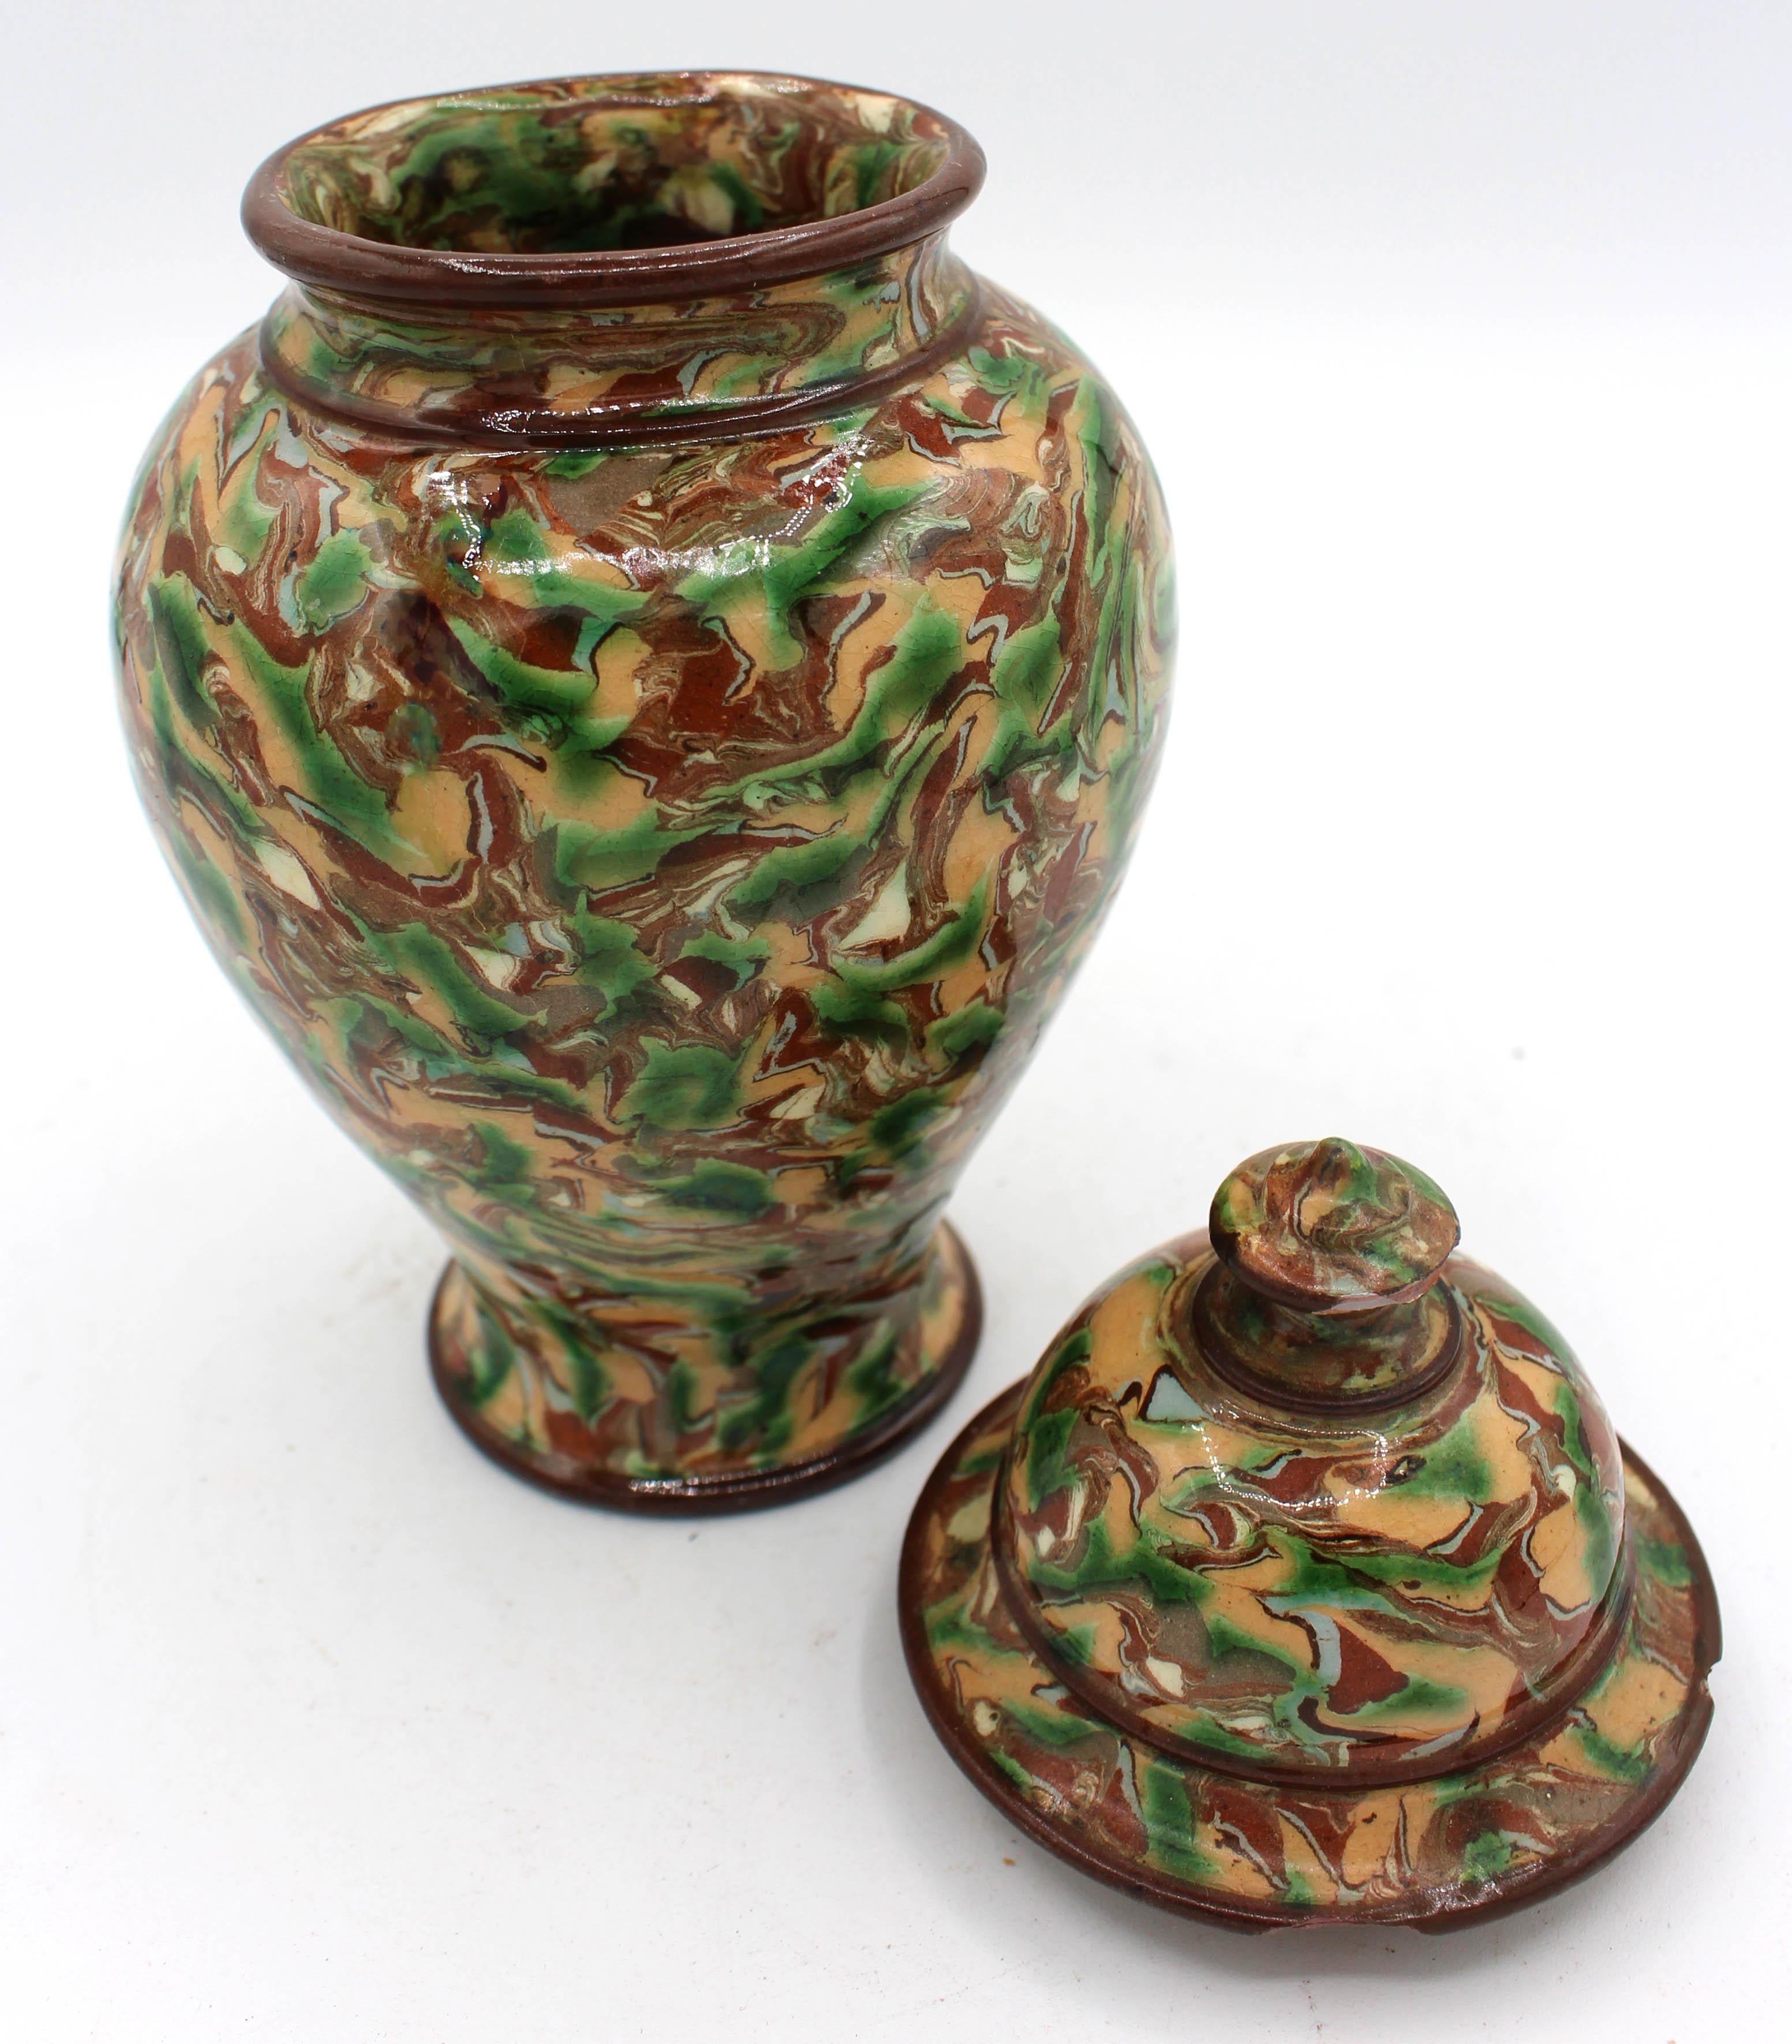 Circa 1900 Terracotta Covered Jar, French, by Maison Pichon Uzes For Sale 1